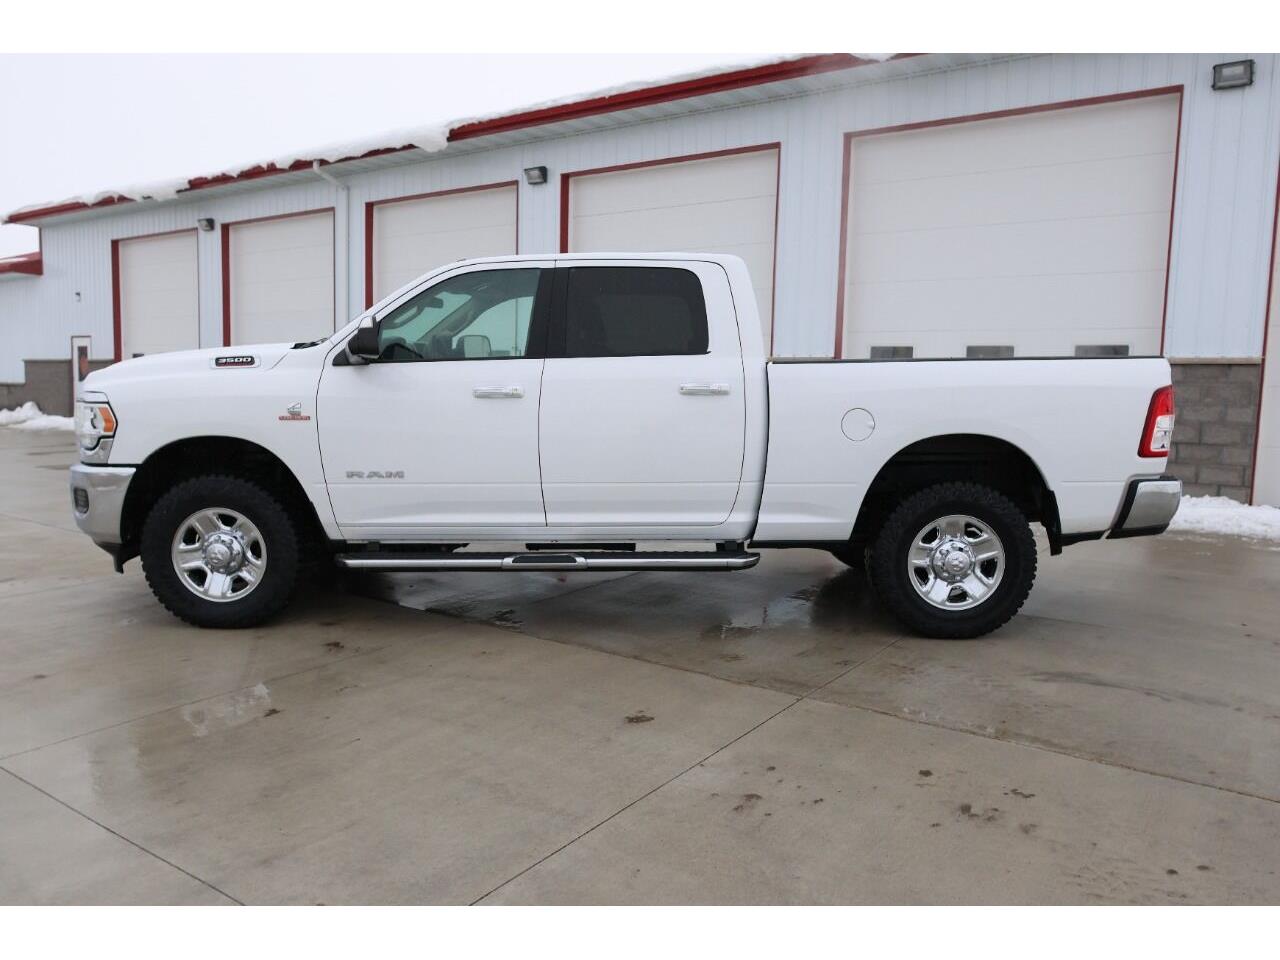 For Sale: 2019 Dodge Ram in Clarence, Iowa for sale in Clarence, IA